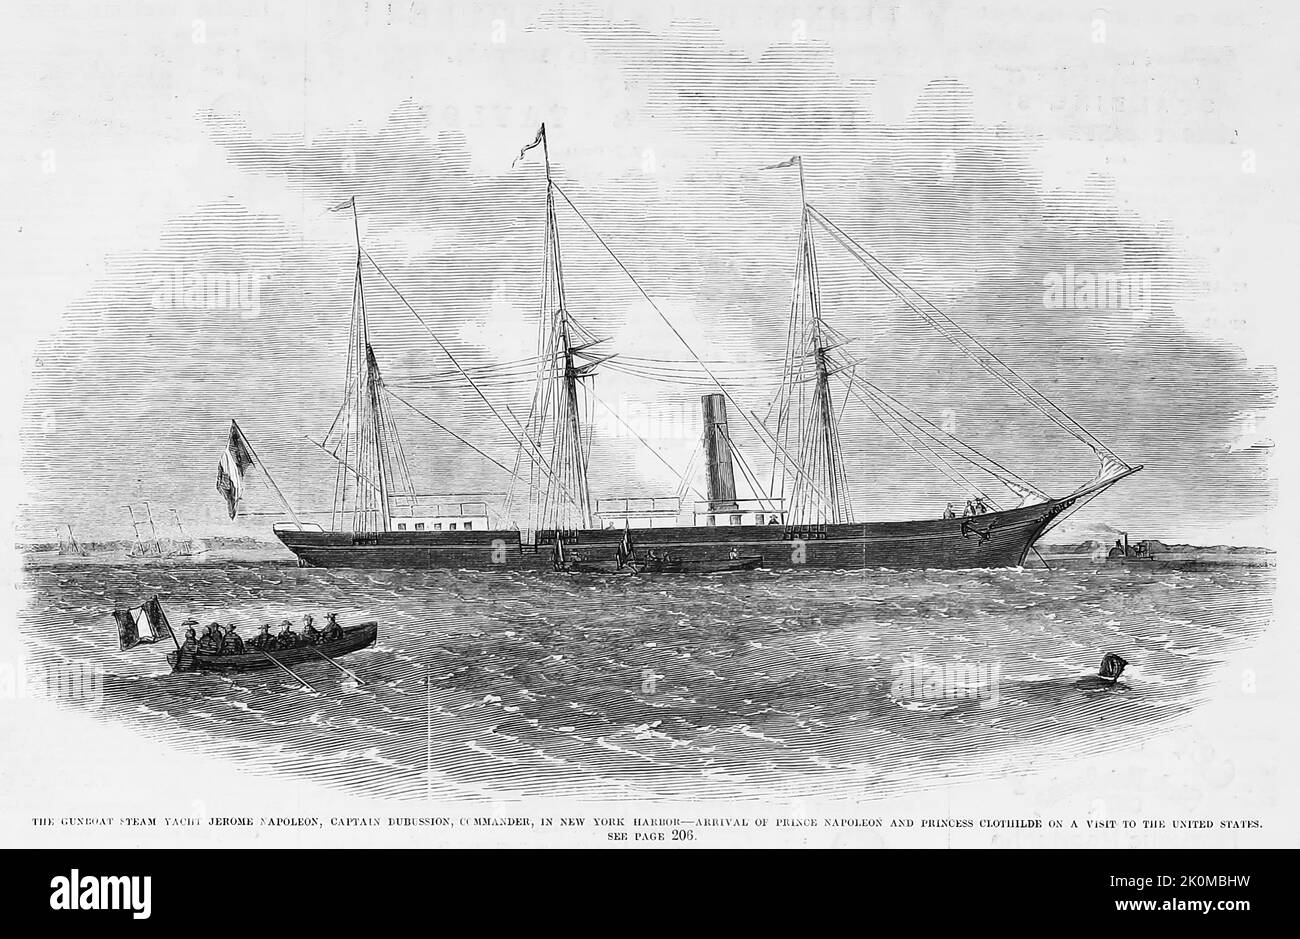 The gunboat steam yacht Jerome Napoleon, Captain Dubussion, commander, in New York Harbor - Arrival of Prince Napoléon Joseph Charles Paul Bonaparte and Princess Maria Clotilde of Savoy on a visit to the United States. August 1861. 19th century illustration from Frank Leslie's Illustrated Newspaper Stock Photo